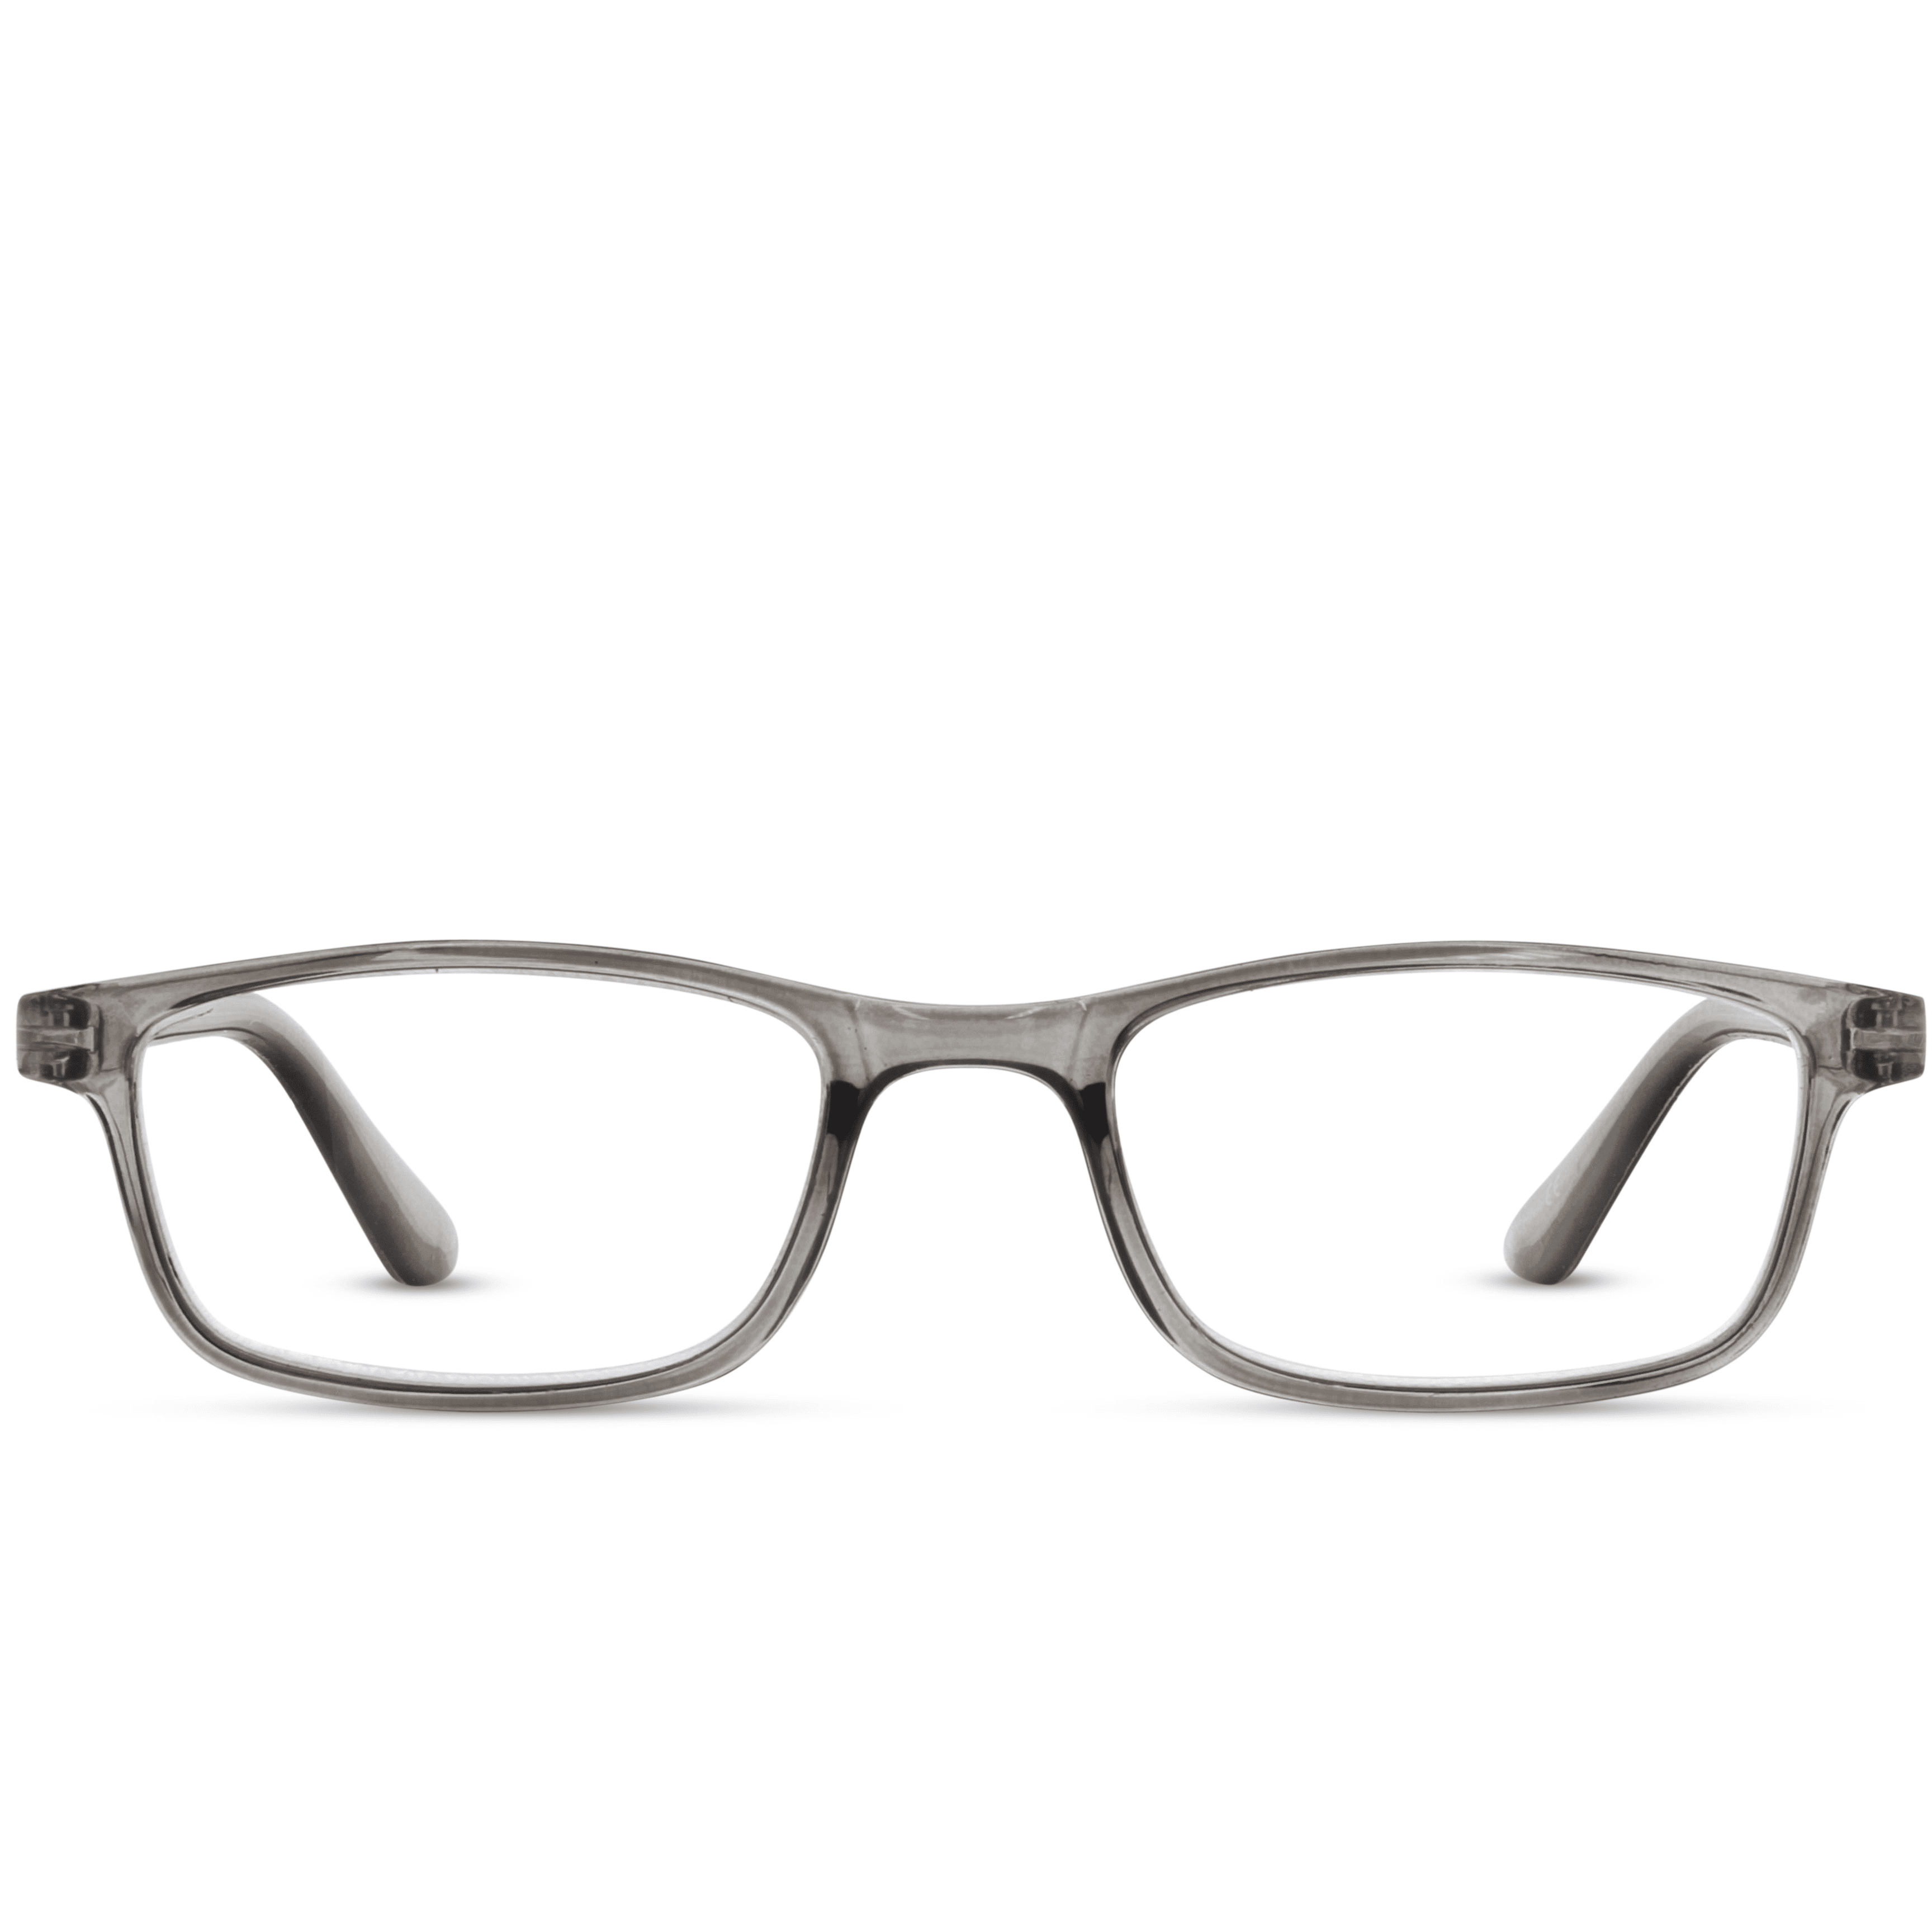 Equate Unisex Reader Glasses with Case, Plastic Lens, Steel Gray Color ...